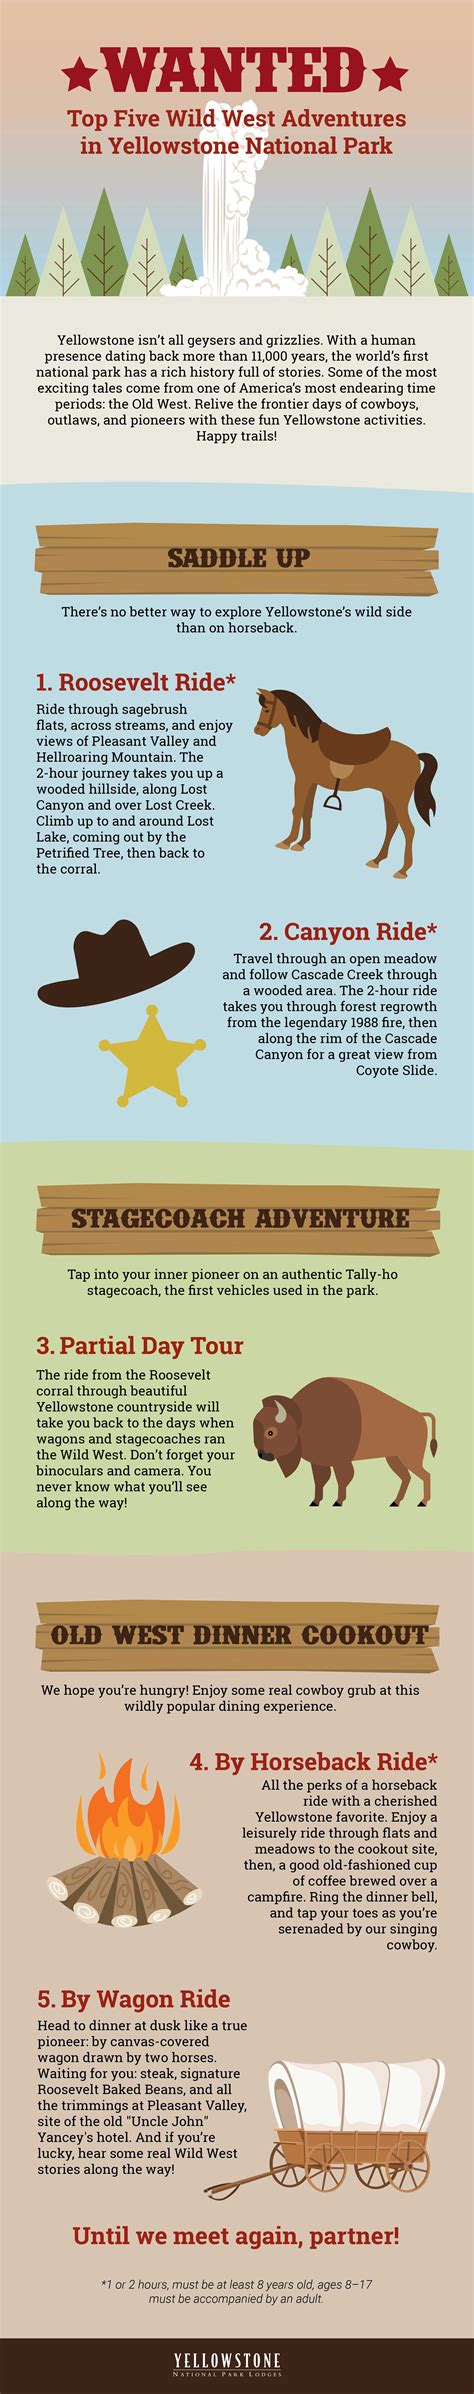 Top 5 Wild West Adventures In Yellowstone Infographic